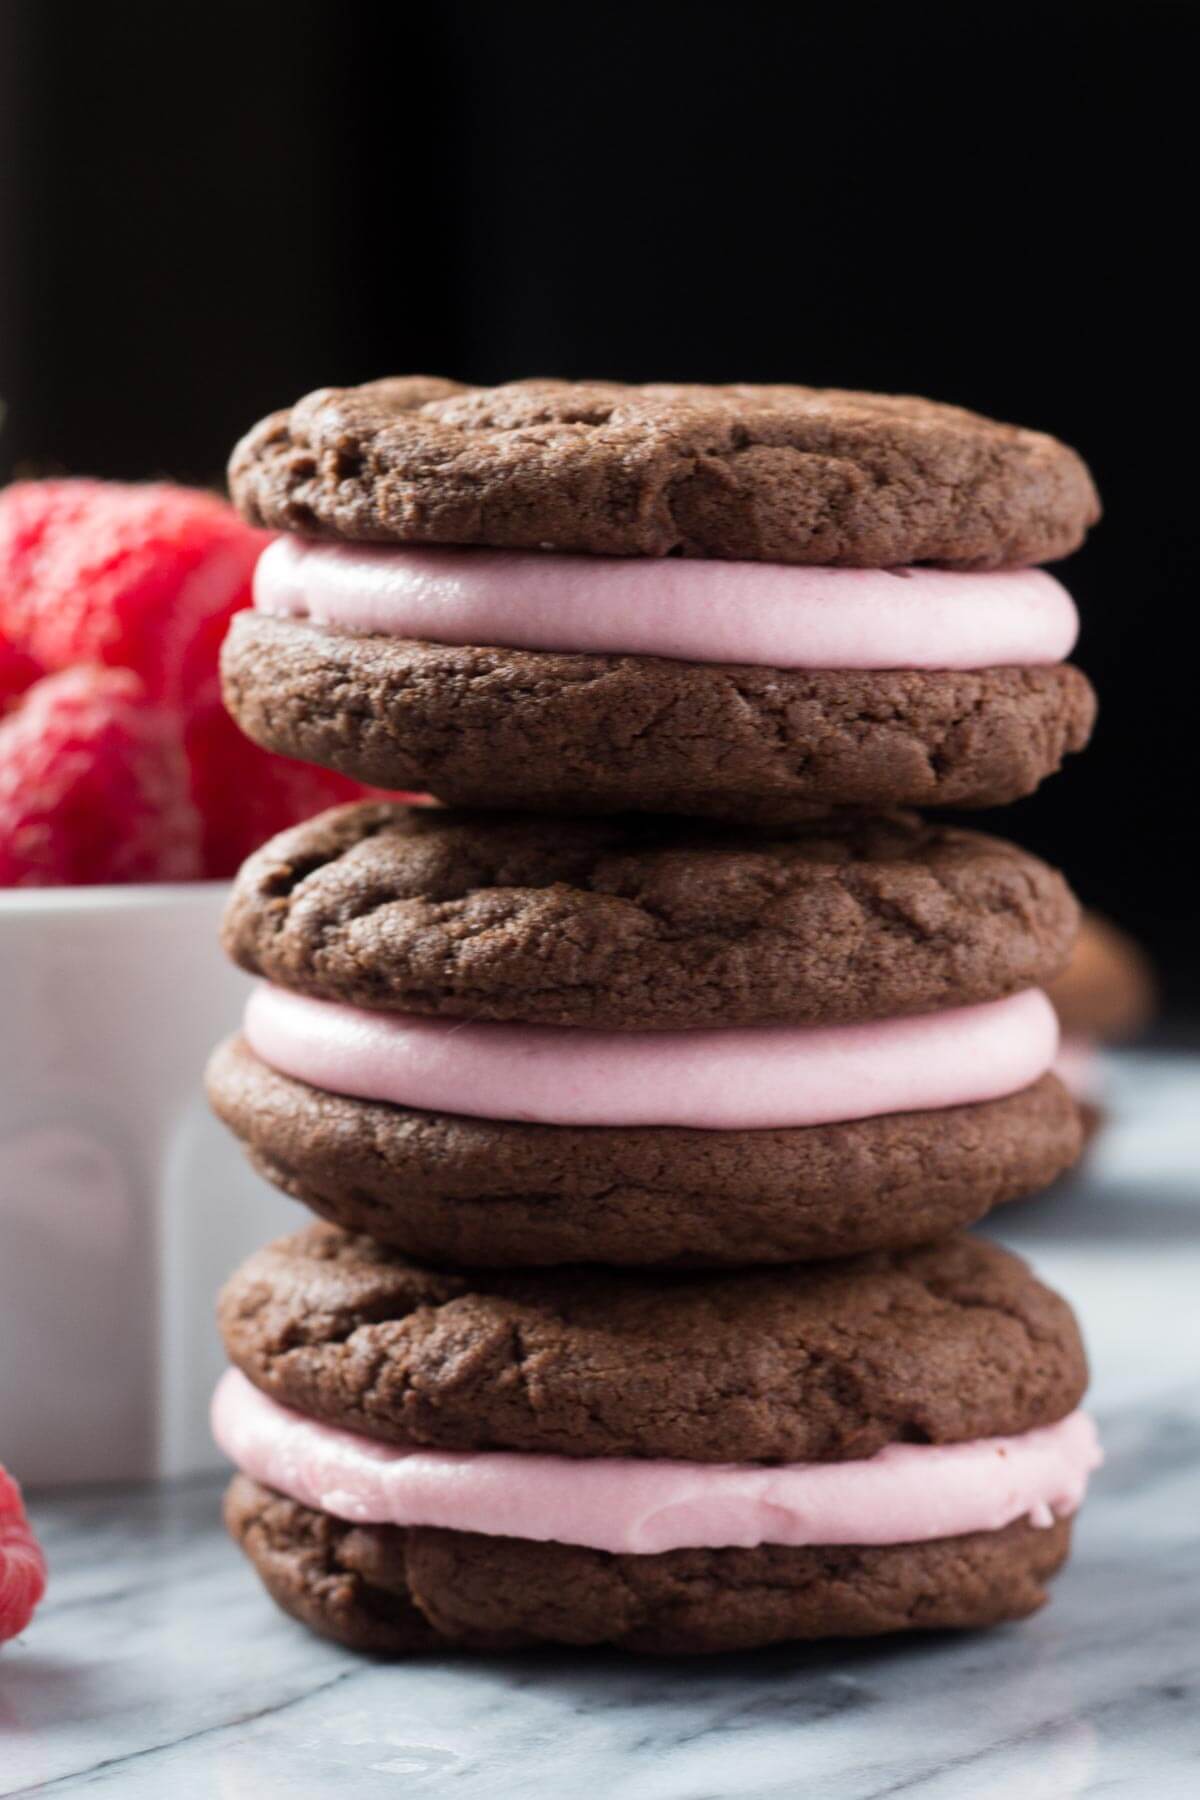 Creamy raspberry frosting sandwiched between two soft & fudgy chocolate cookies. These sandwich cookies are the perfect recipe for Valentine's!